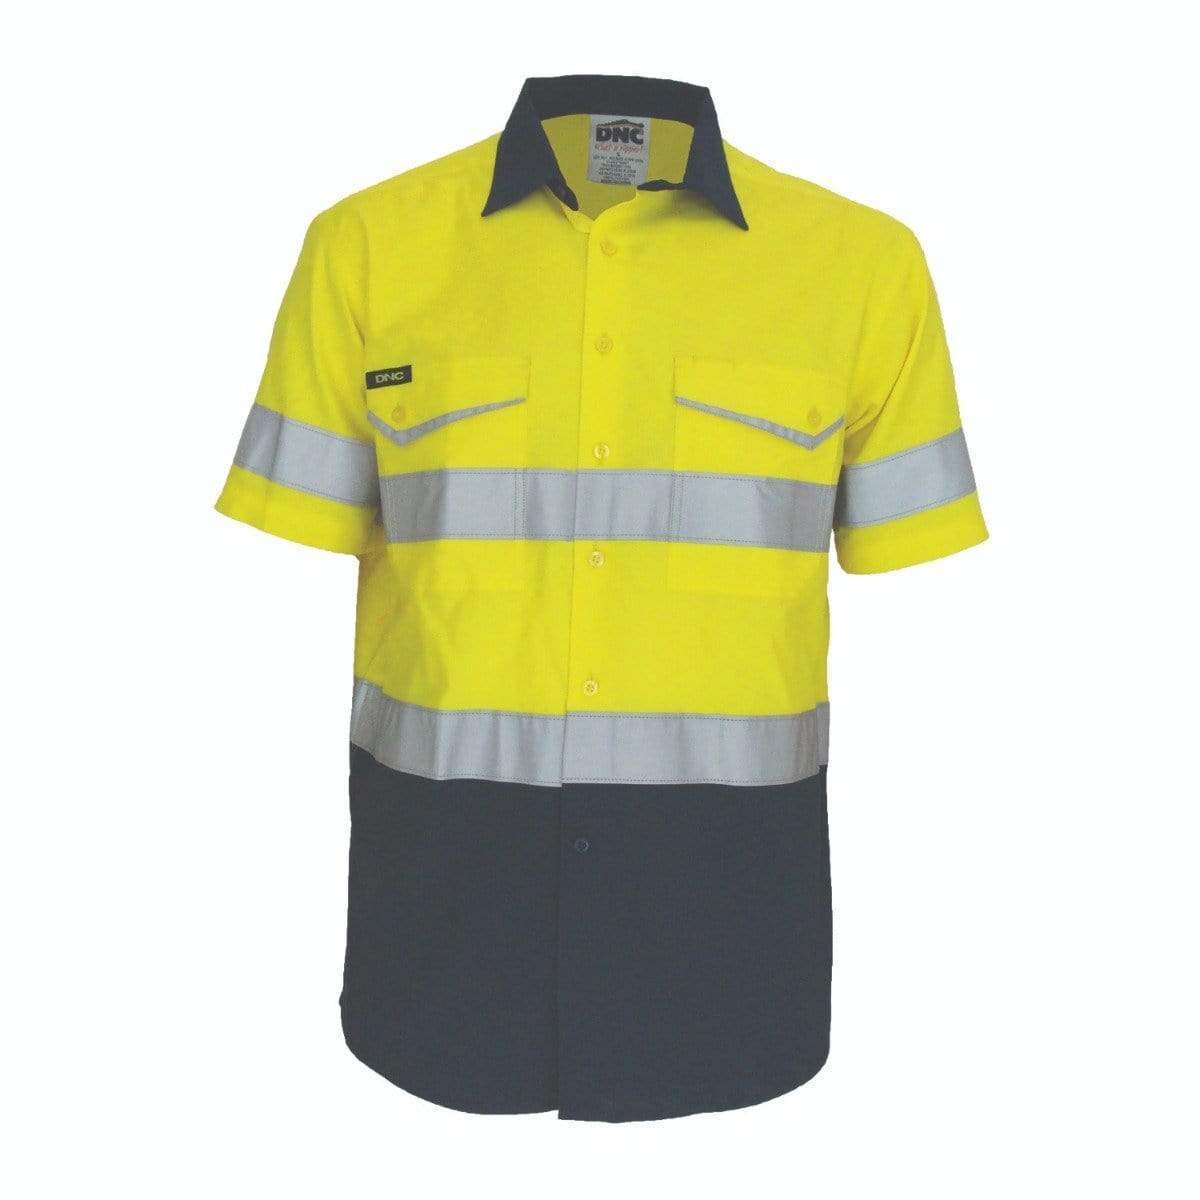 Dnc Workwear Two-tone Ripstop Cotton Short Sleeve Shirt With Csr Reflective Tape - 3587 Work Wear DNC Workwear Yellow/Navy XS 